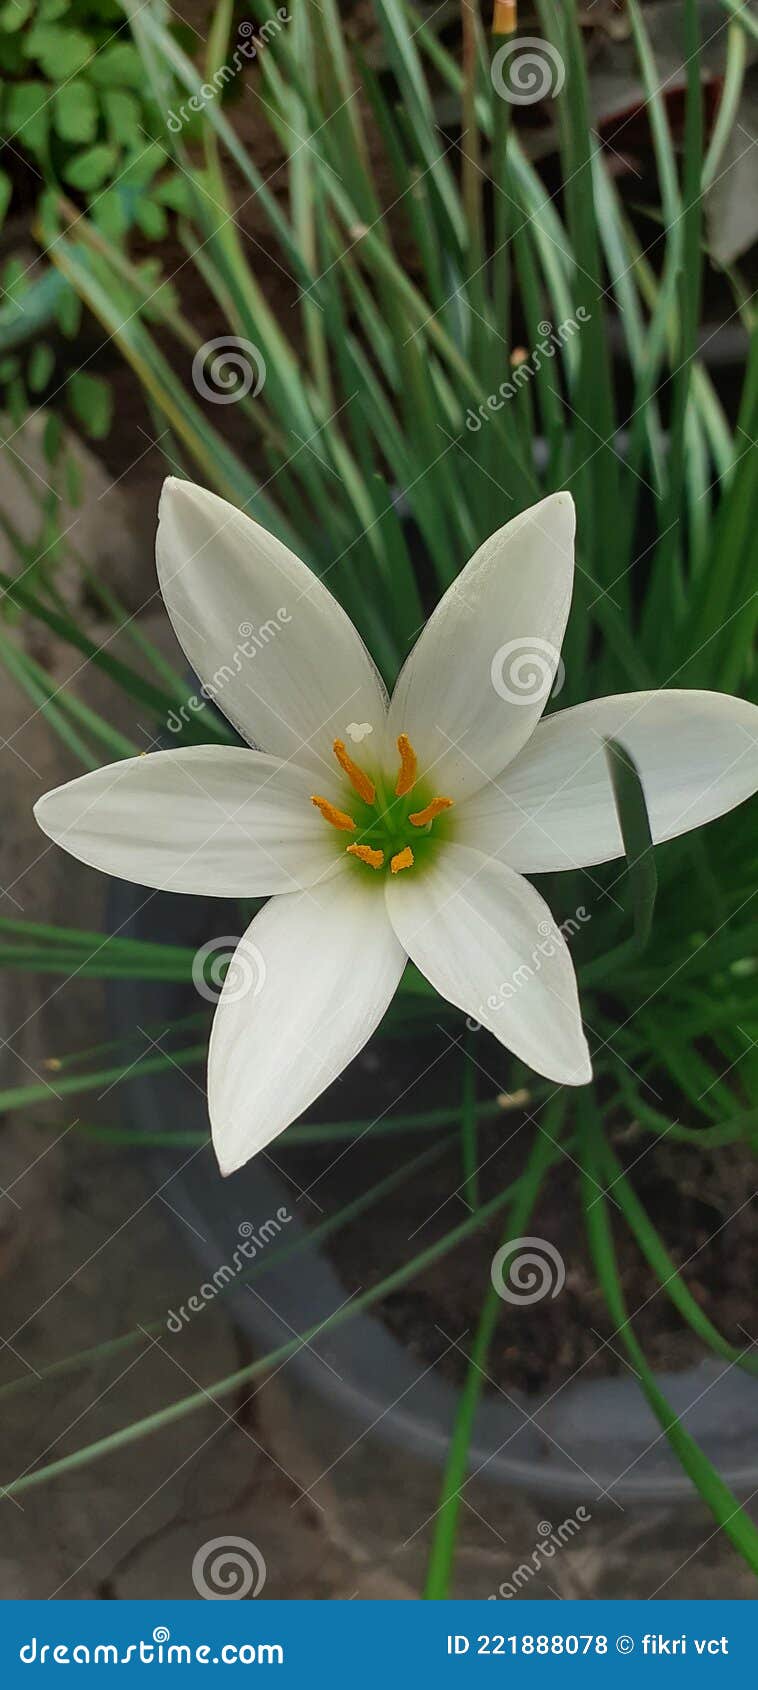 cacao flower or zephyranthes candida is a type of medicinal plant. wikipedia